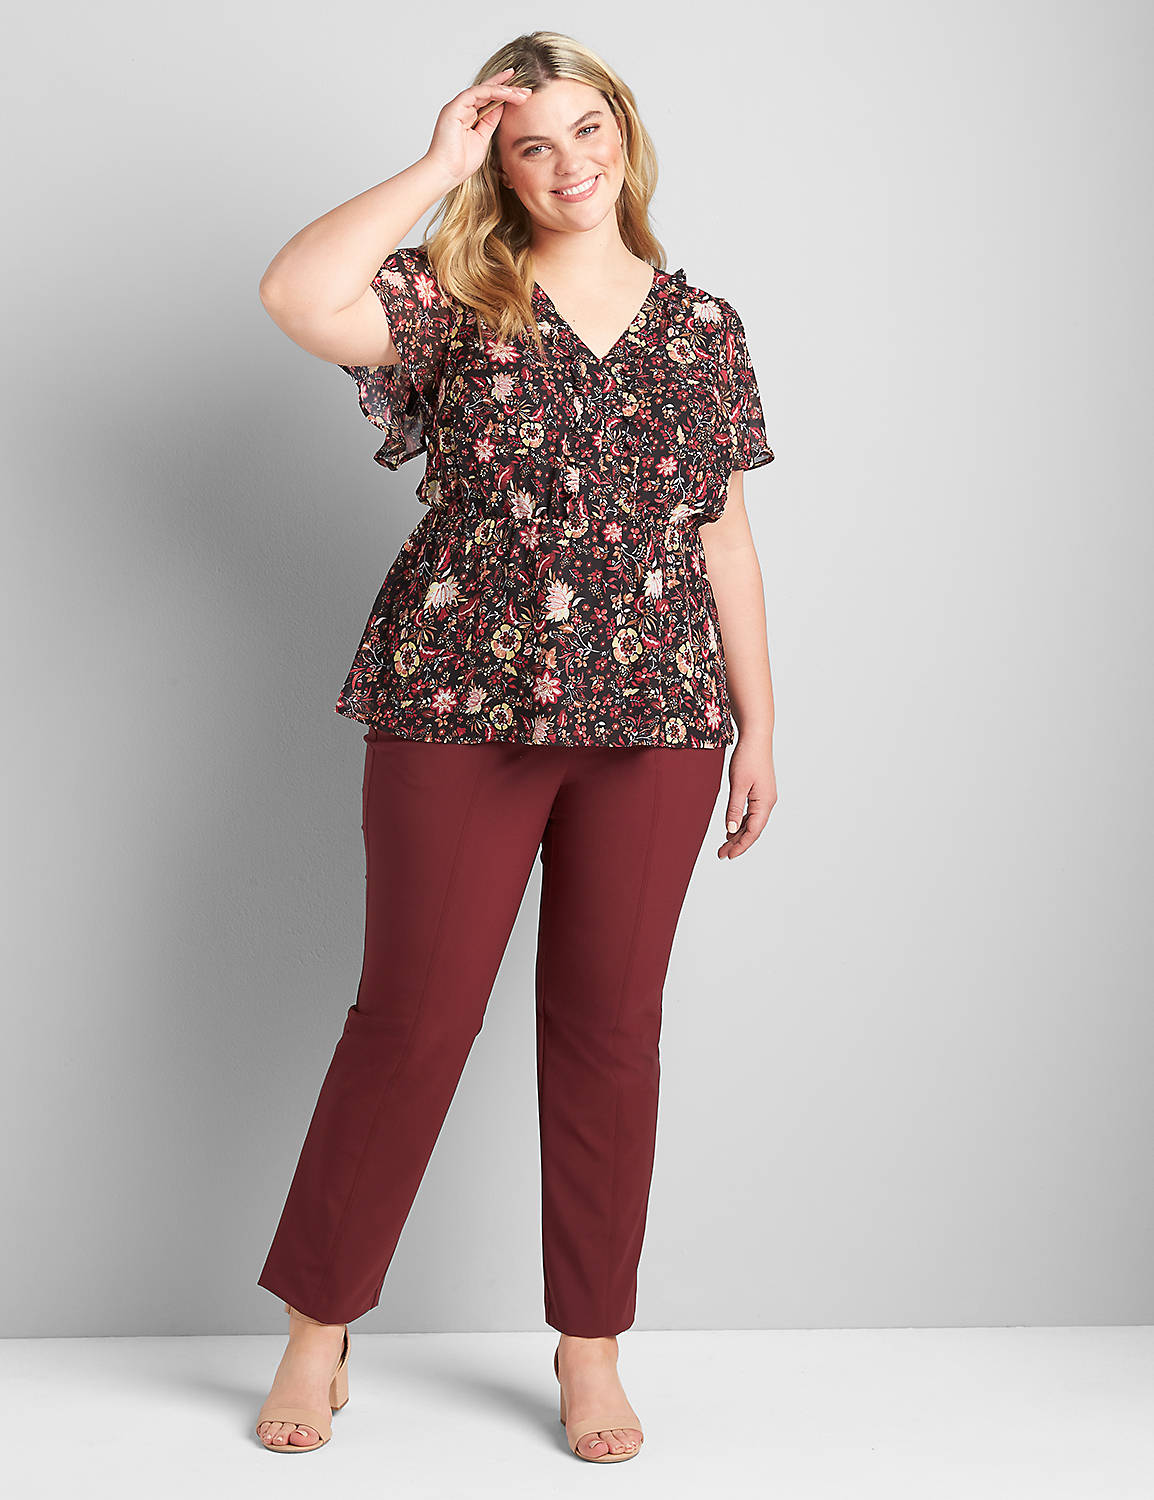 Peplum Top With Ruffle Detail Product Image 3